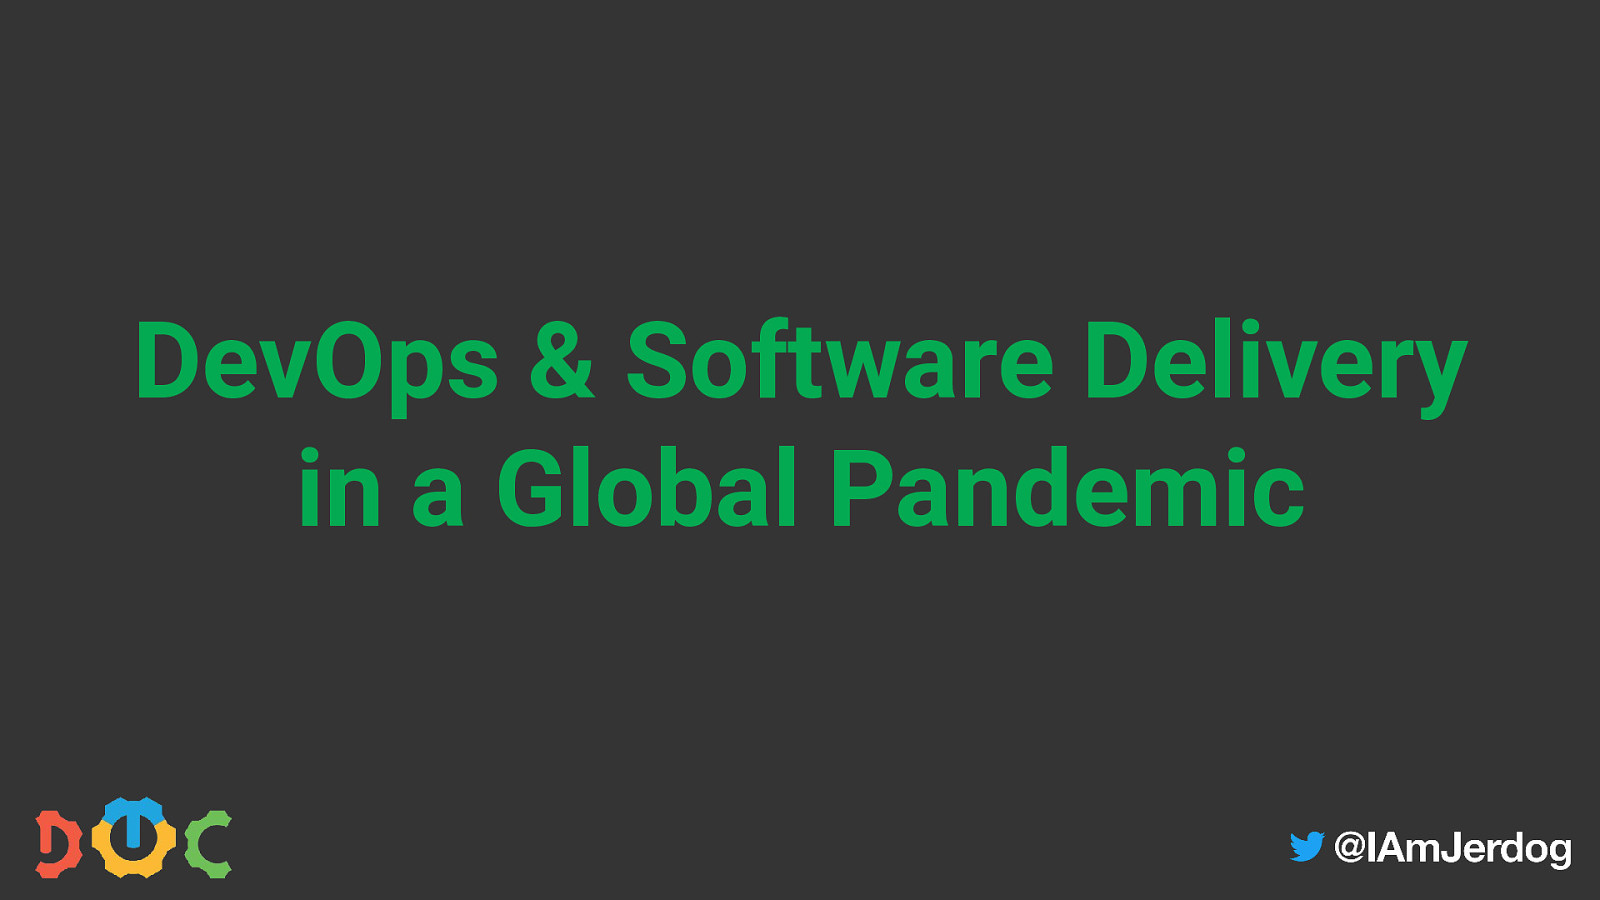 DevOps, Software Delivery, and a Pandemic